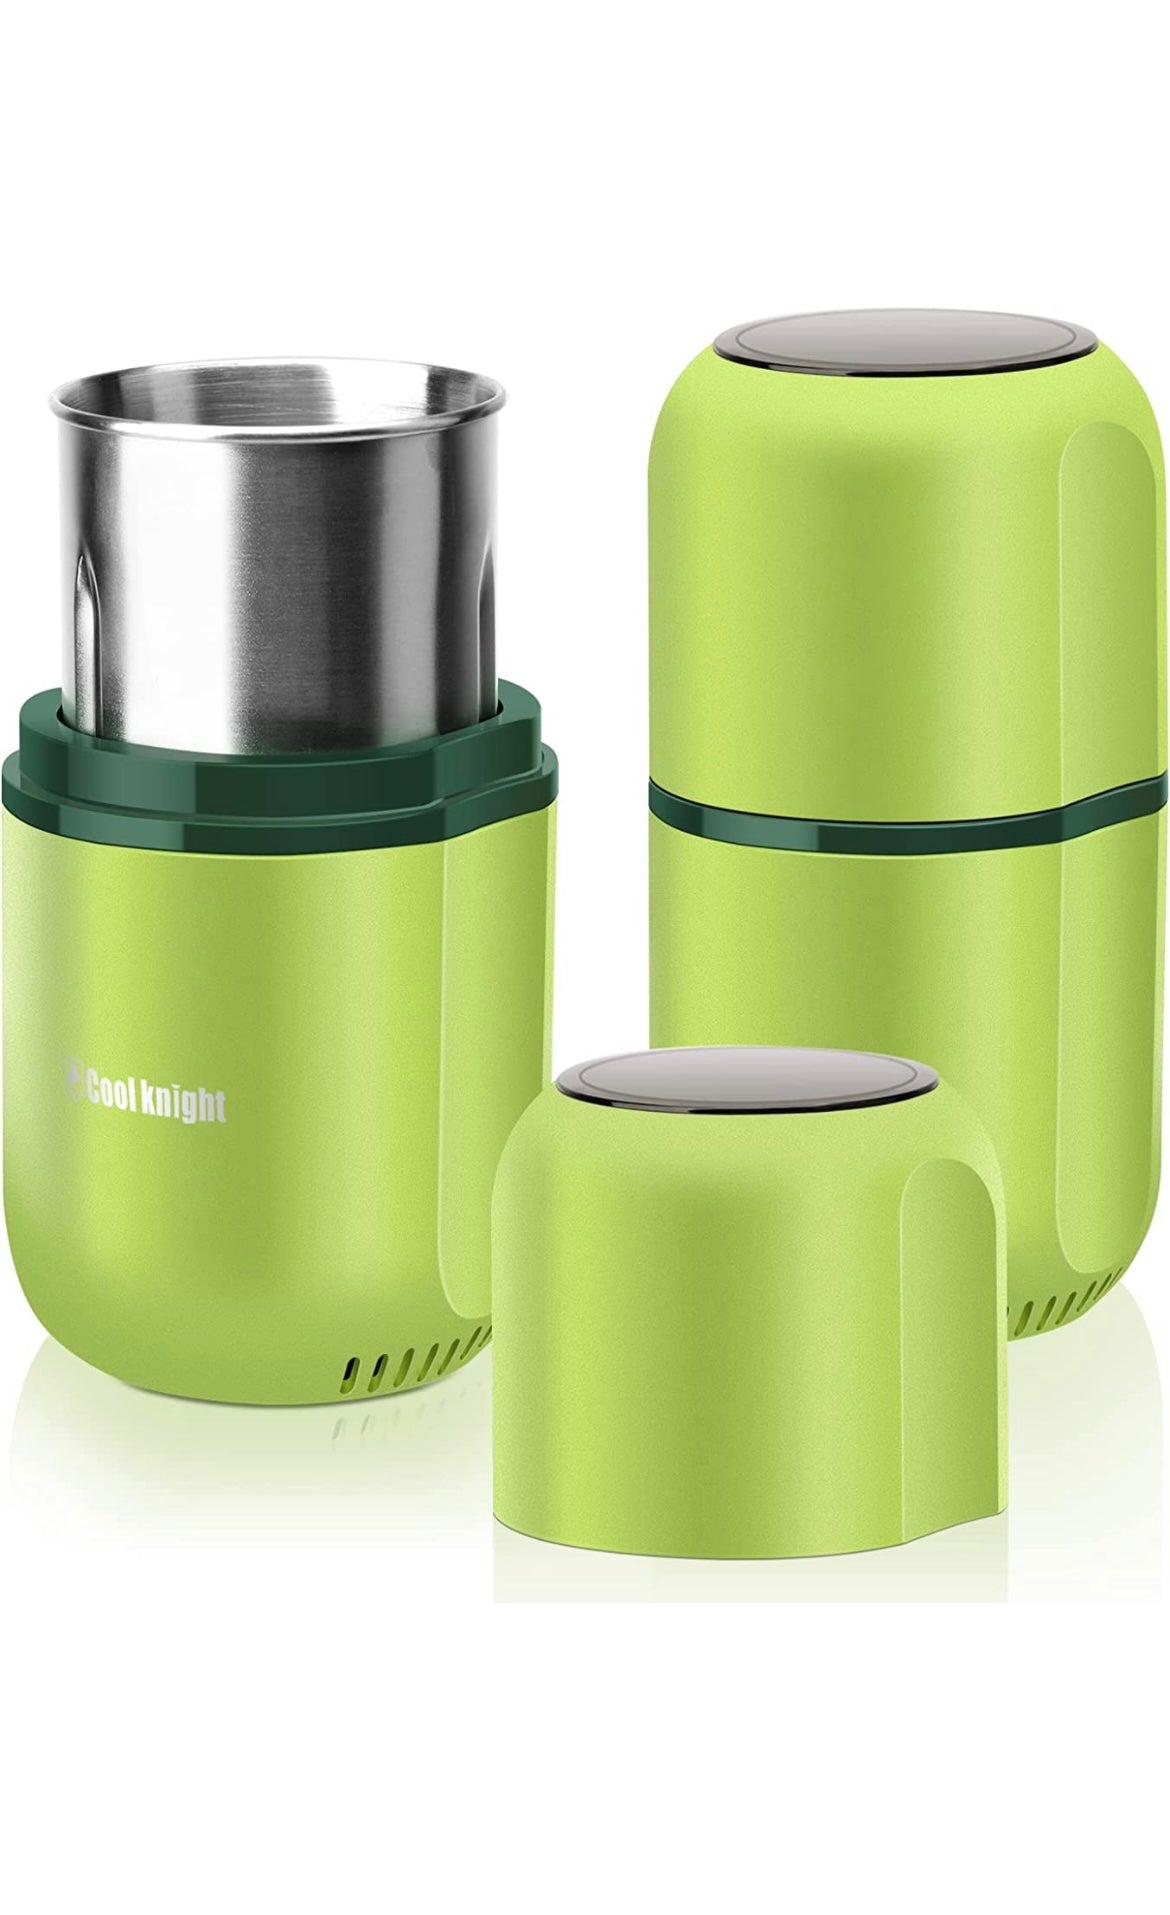 Cool knight COOL KNIGHT Electric Herb Grinder Spice Grinder, USB